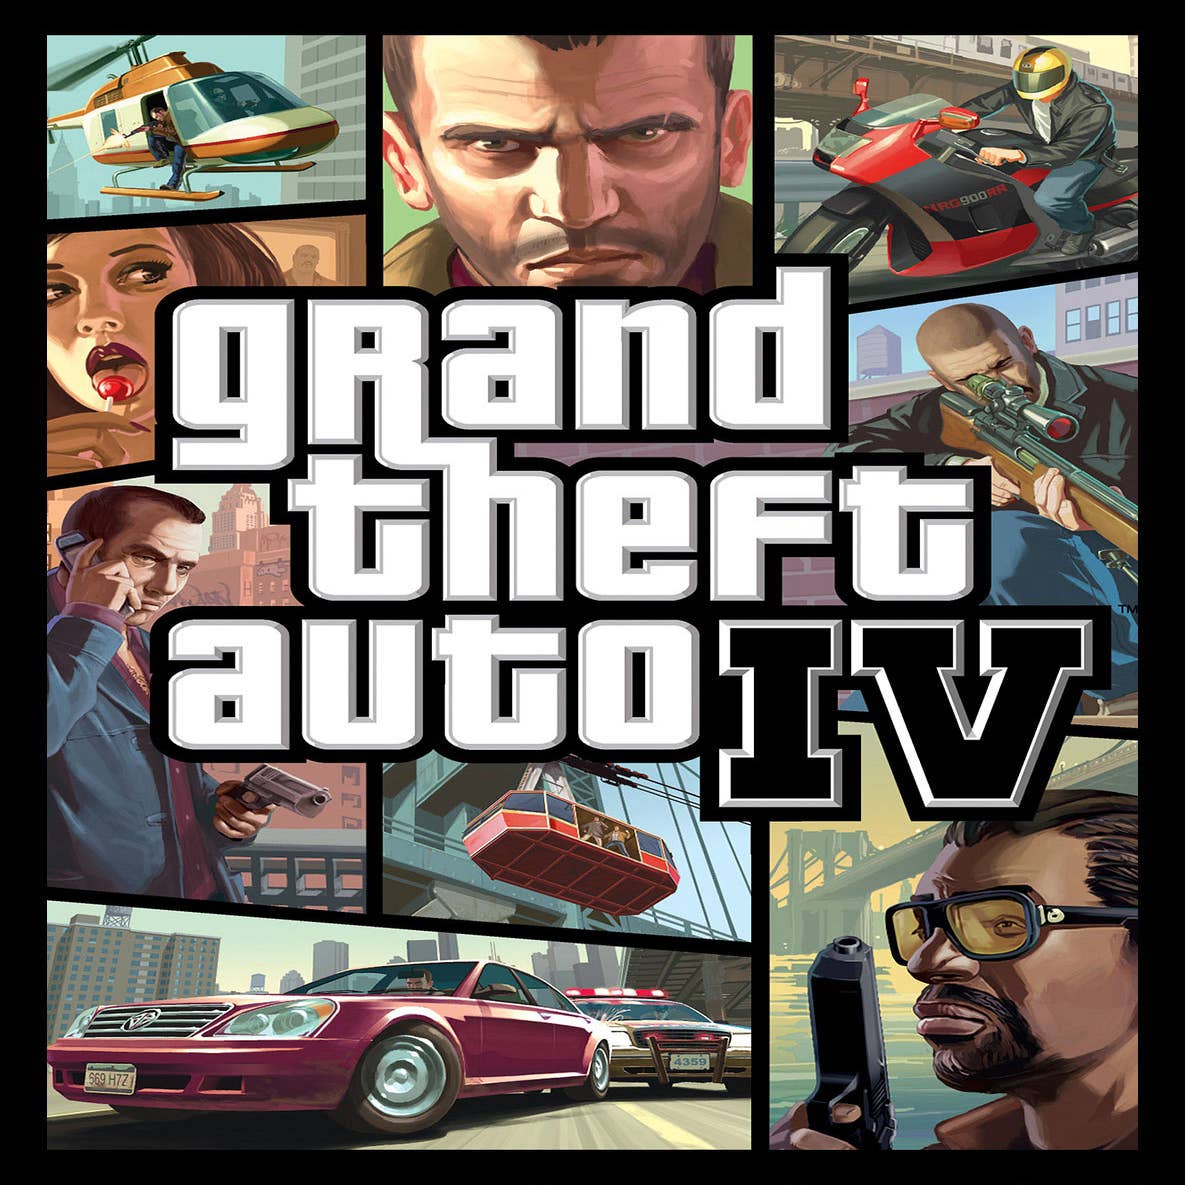 Grand Theft Auto IV: Complete Edition, Steam Deck Gameplay